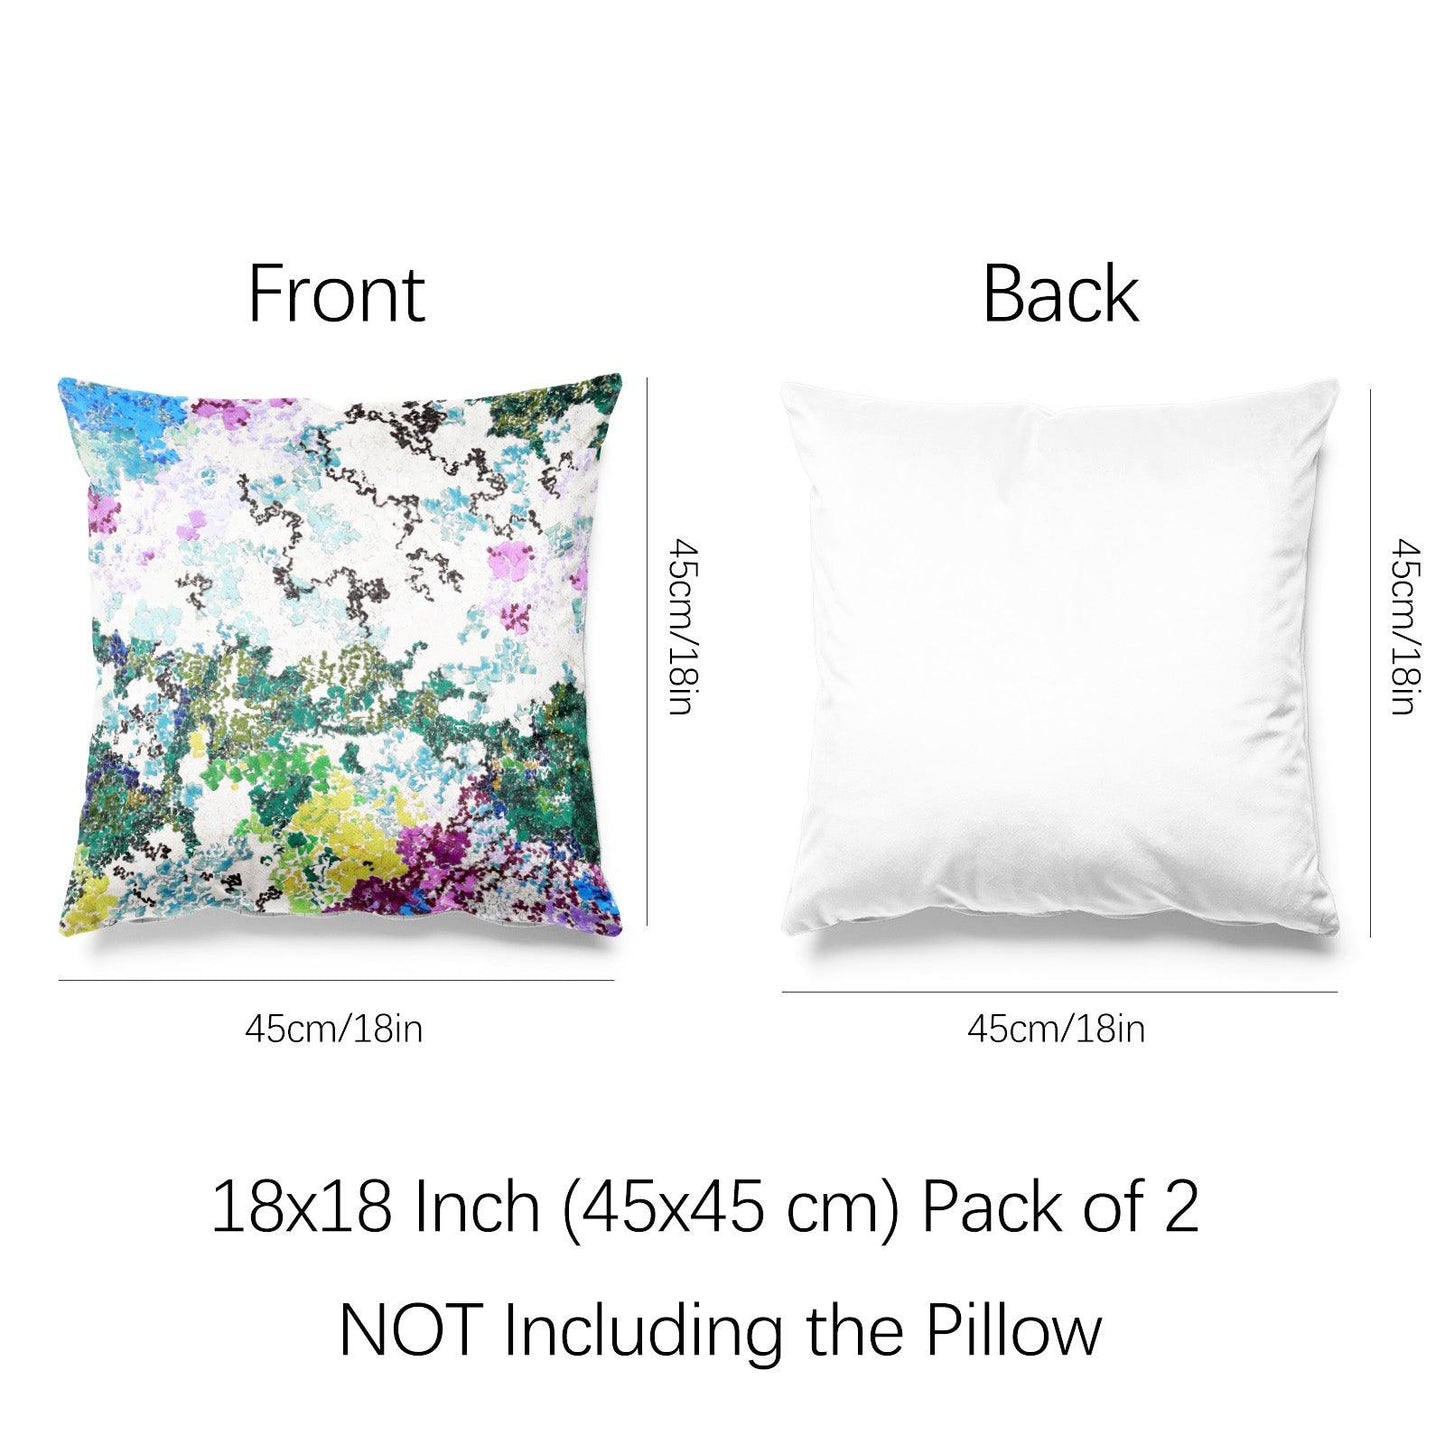 Art Flower Throw Pillow Covers Pack of 2 18x18 Inch (May Morning by Giacometti) - Berkin Arts